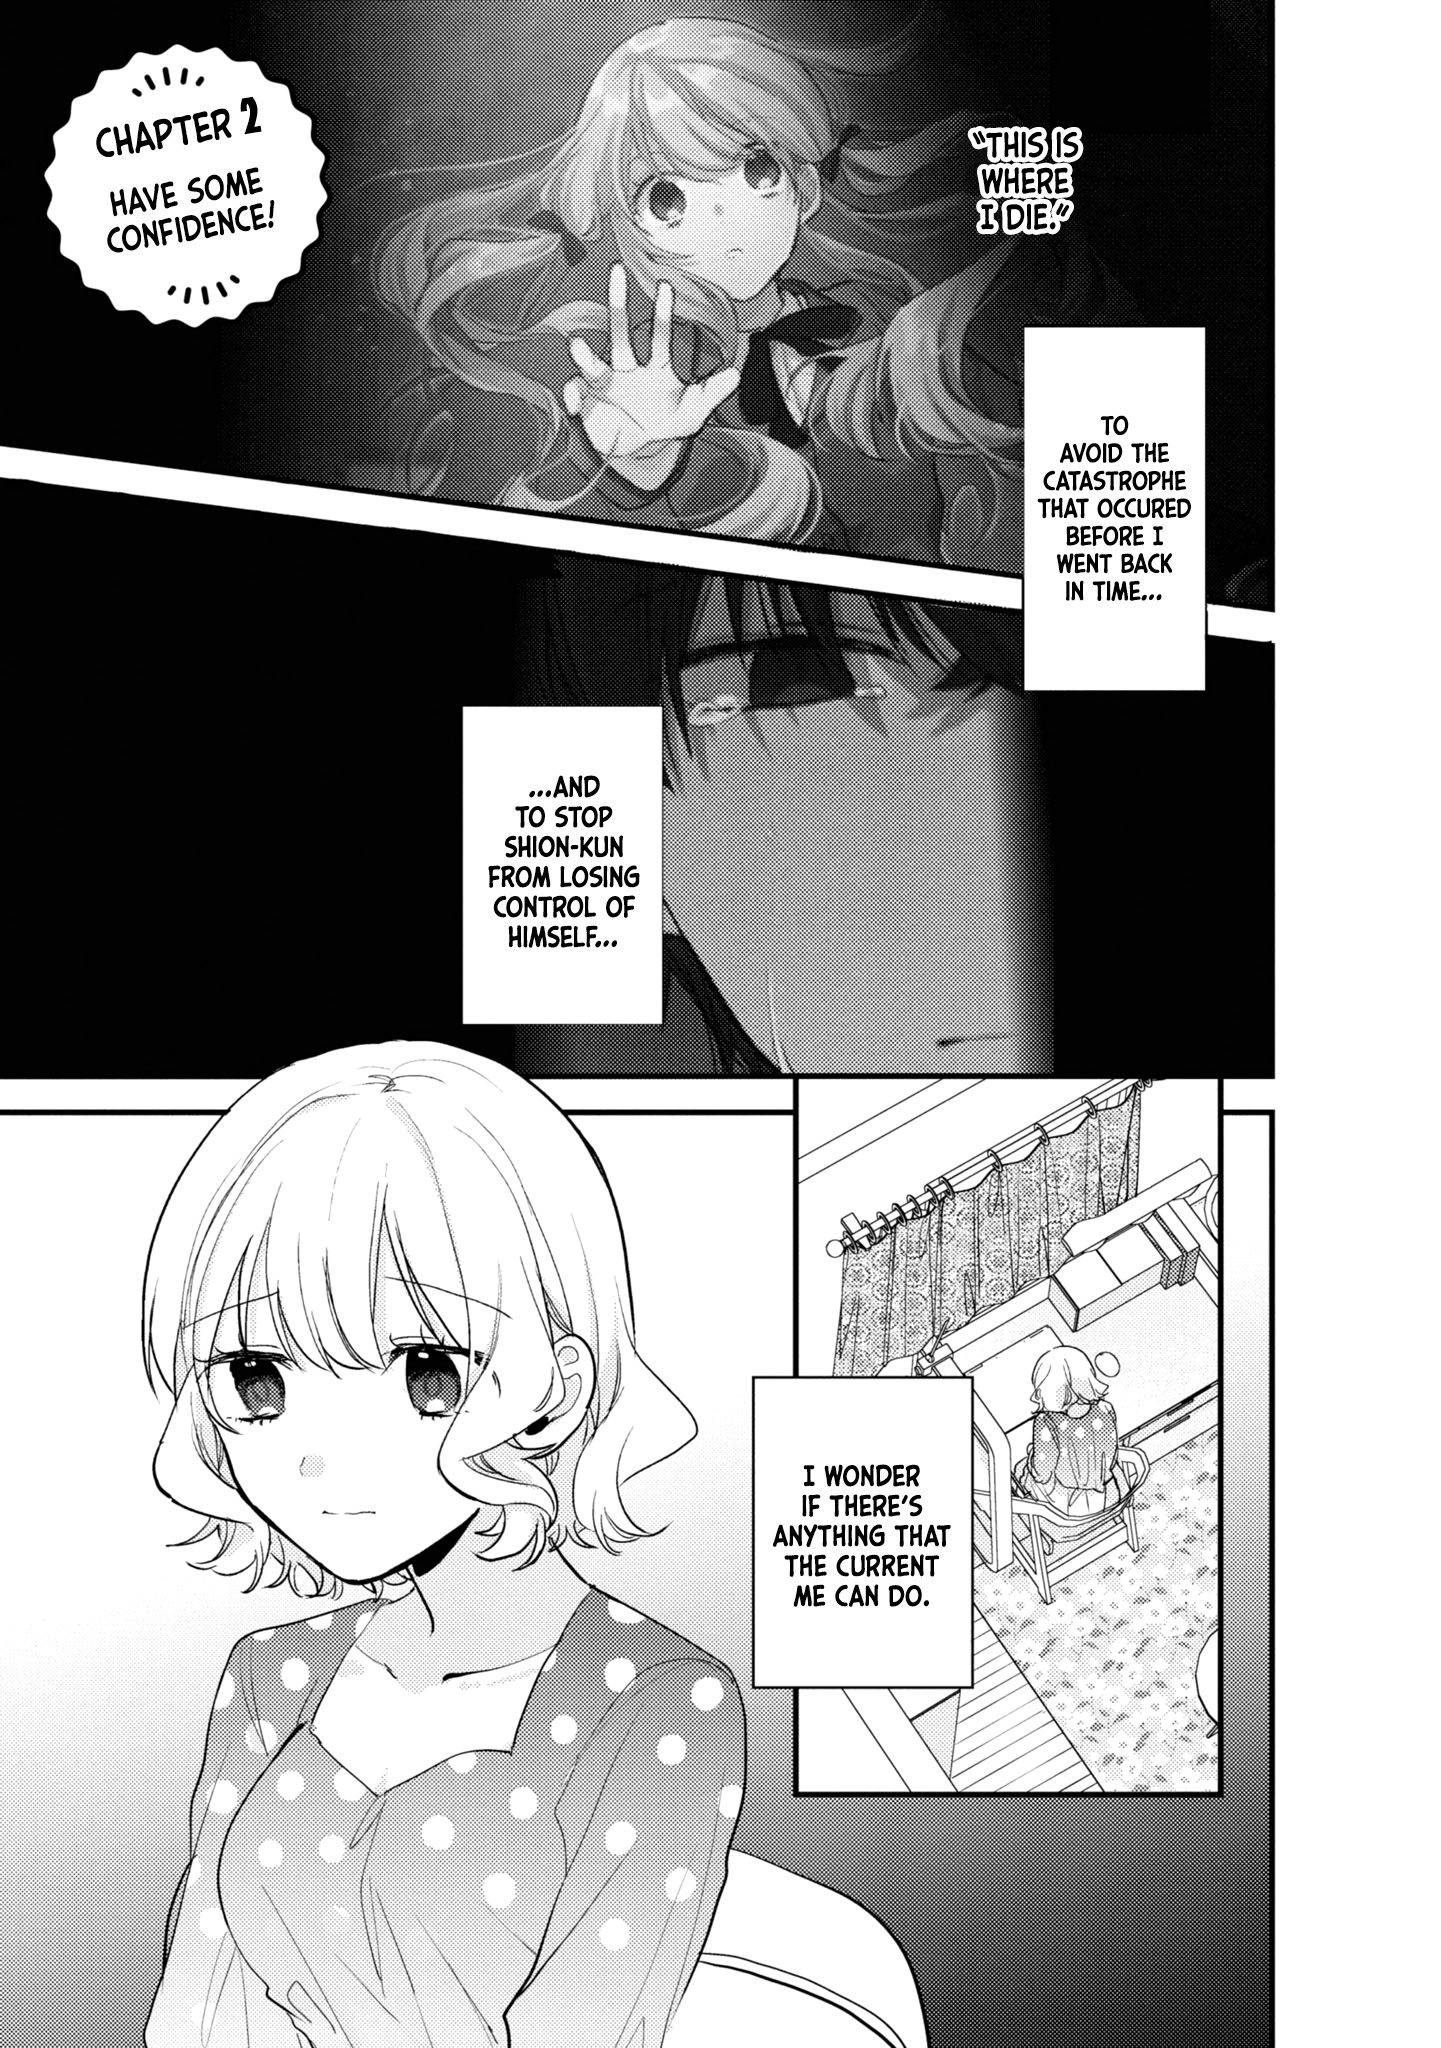 I Have A Second Chance At Life, So I’Ll Pamper My Yandere Boyfriend For A Happy Ending!! - Page 2